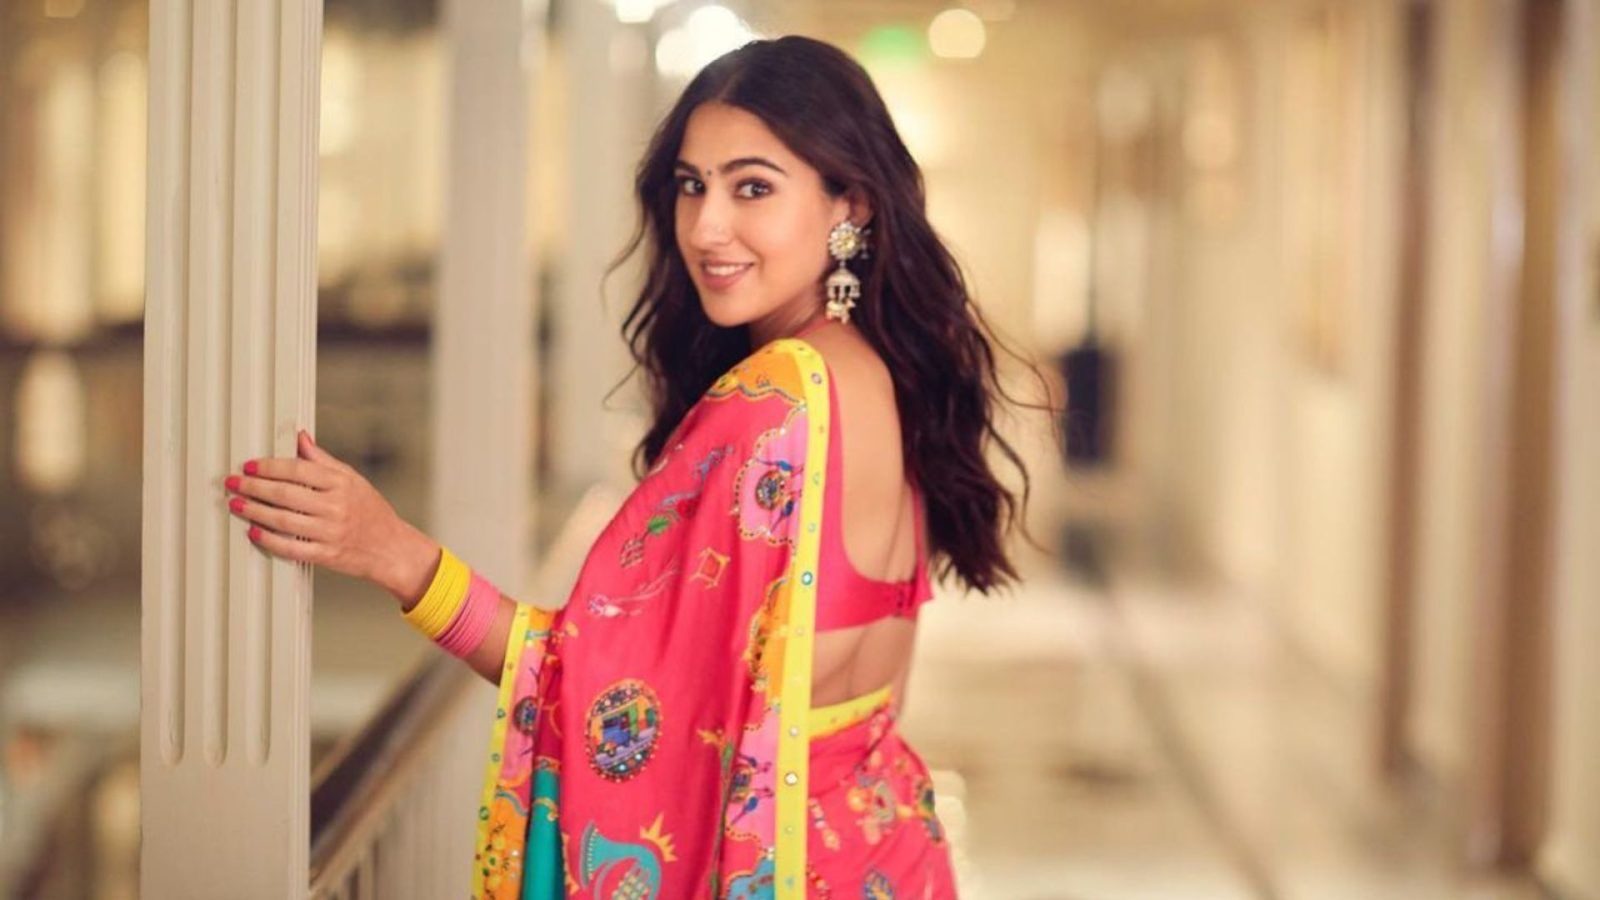 Stylish and Stunning: Sara Ali Khan is the New Face of Ceriz